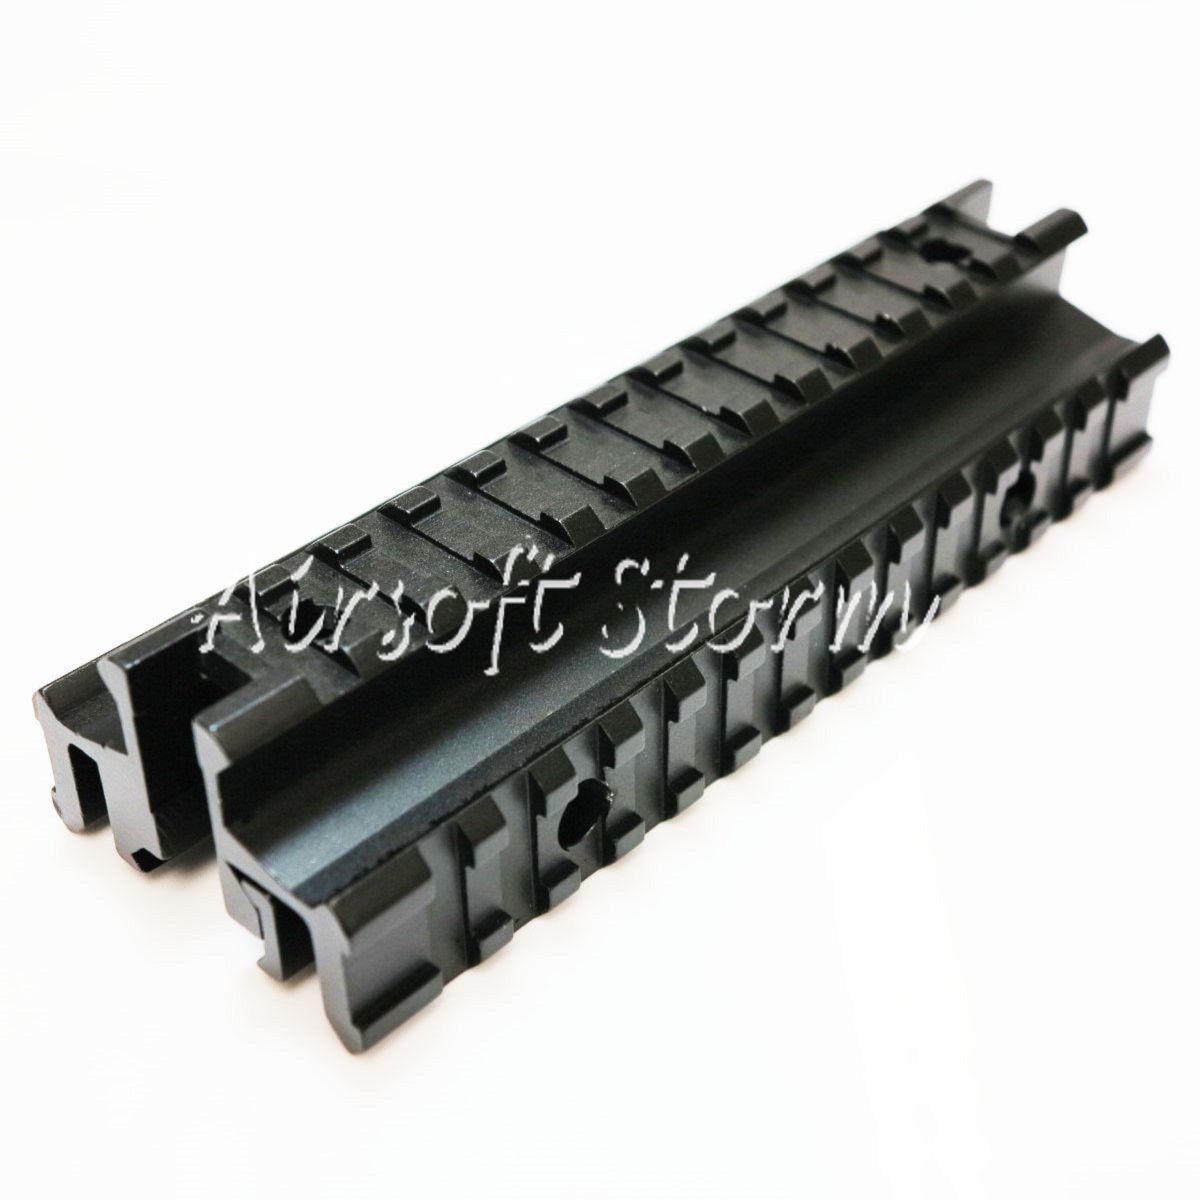 Shooting Gear Army Force Tactical Tri-Rail Mount Base for 20mm Rail